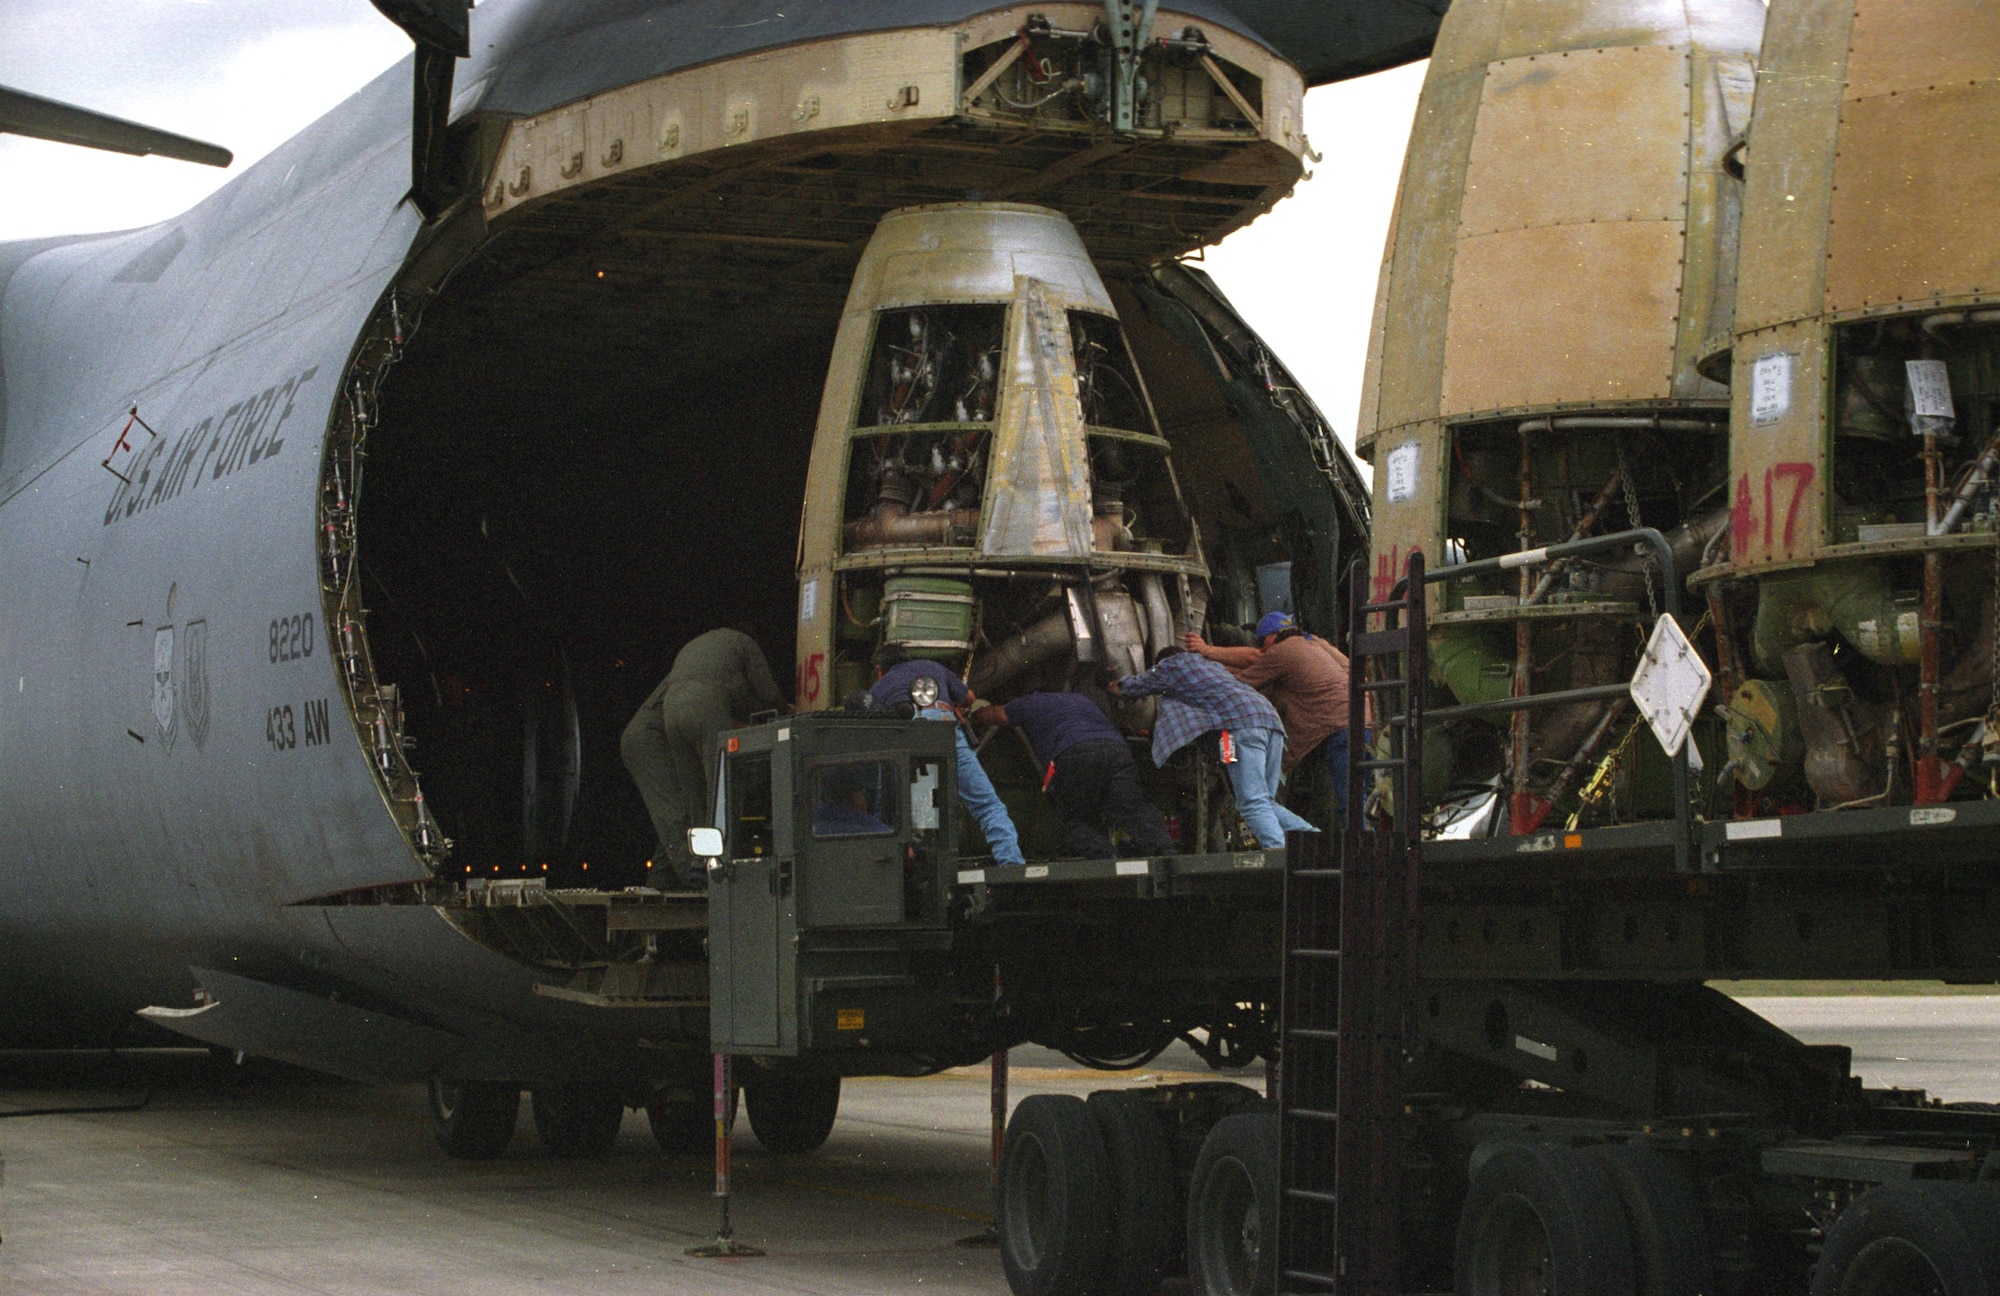 LACKLAND AIR FORCE BASE, Texas -- Airmen from the 433rd Airlift Wing here load XC-99 engines onto a C-5 Galaxy before taking them to the Air Force Museum near Wright-Patterson Air Force Base, Ohio.  (U.S. Air Force photo by 1st Lt. Bruce R. Hill Jr.)